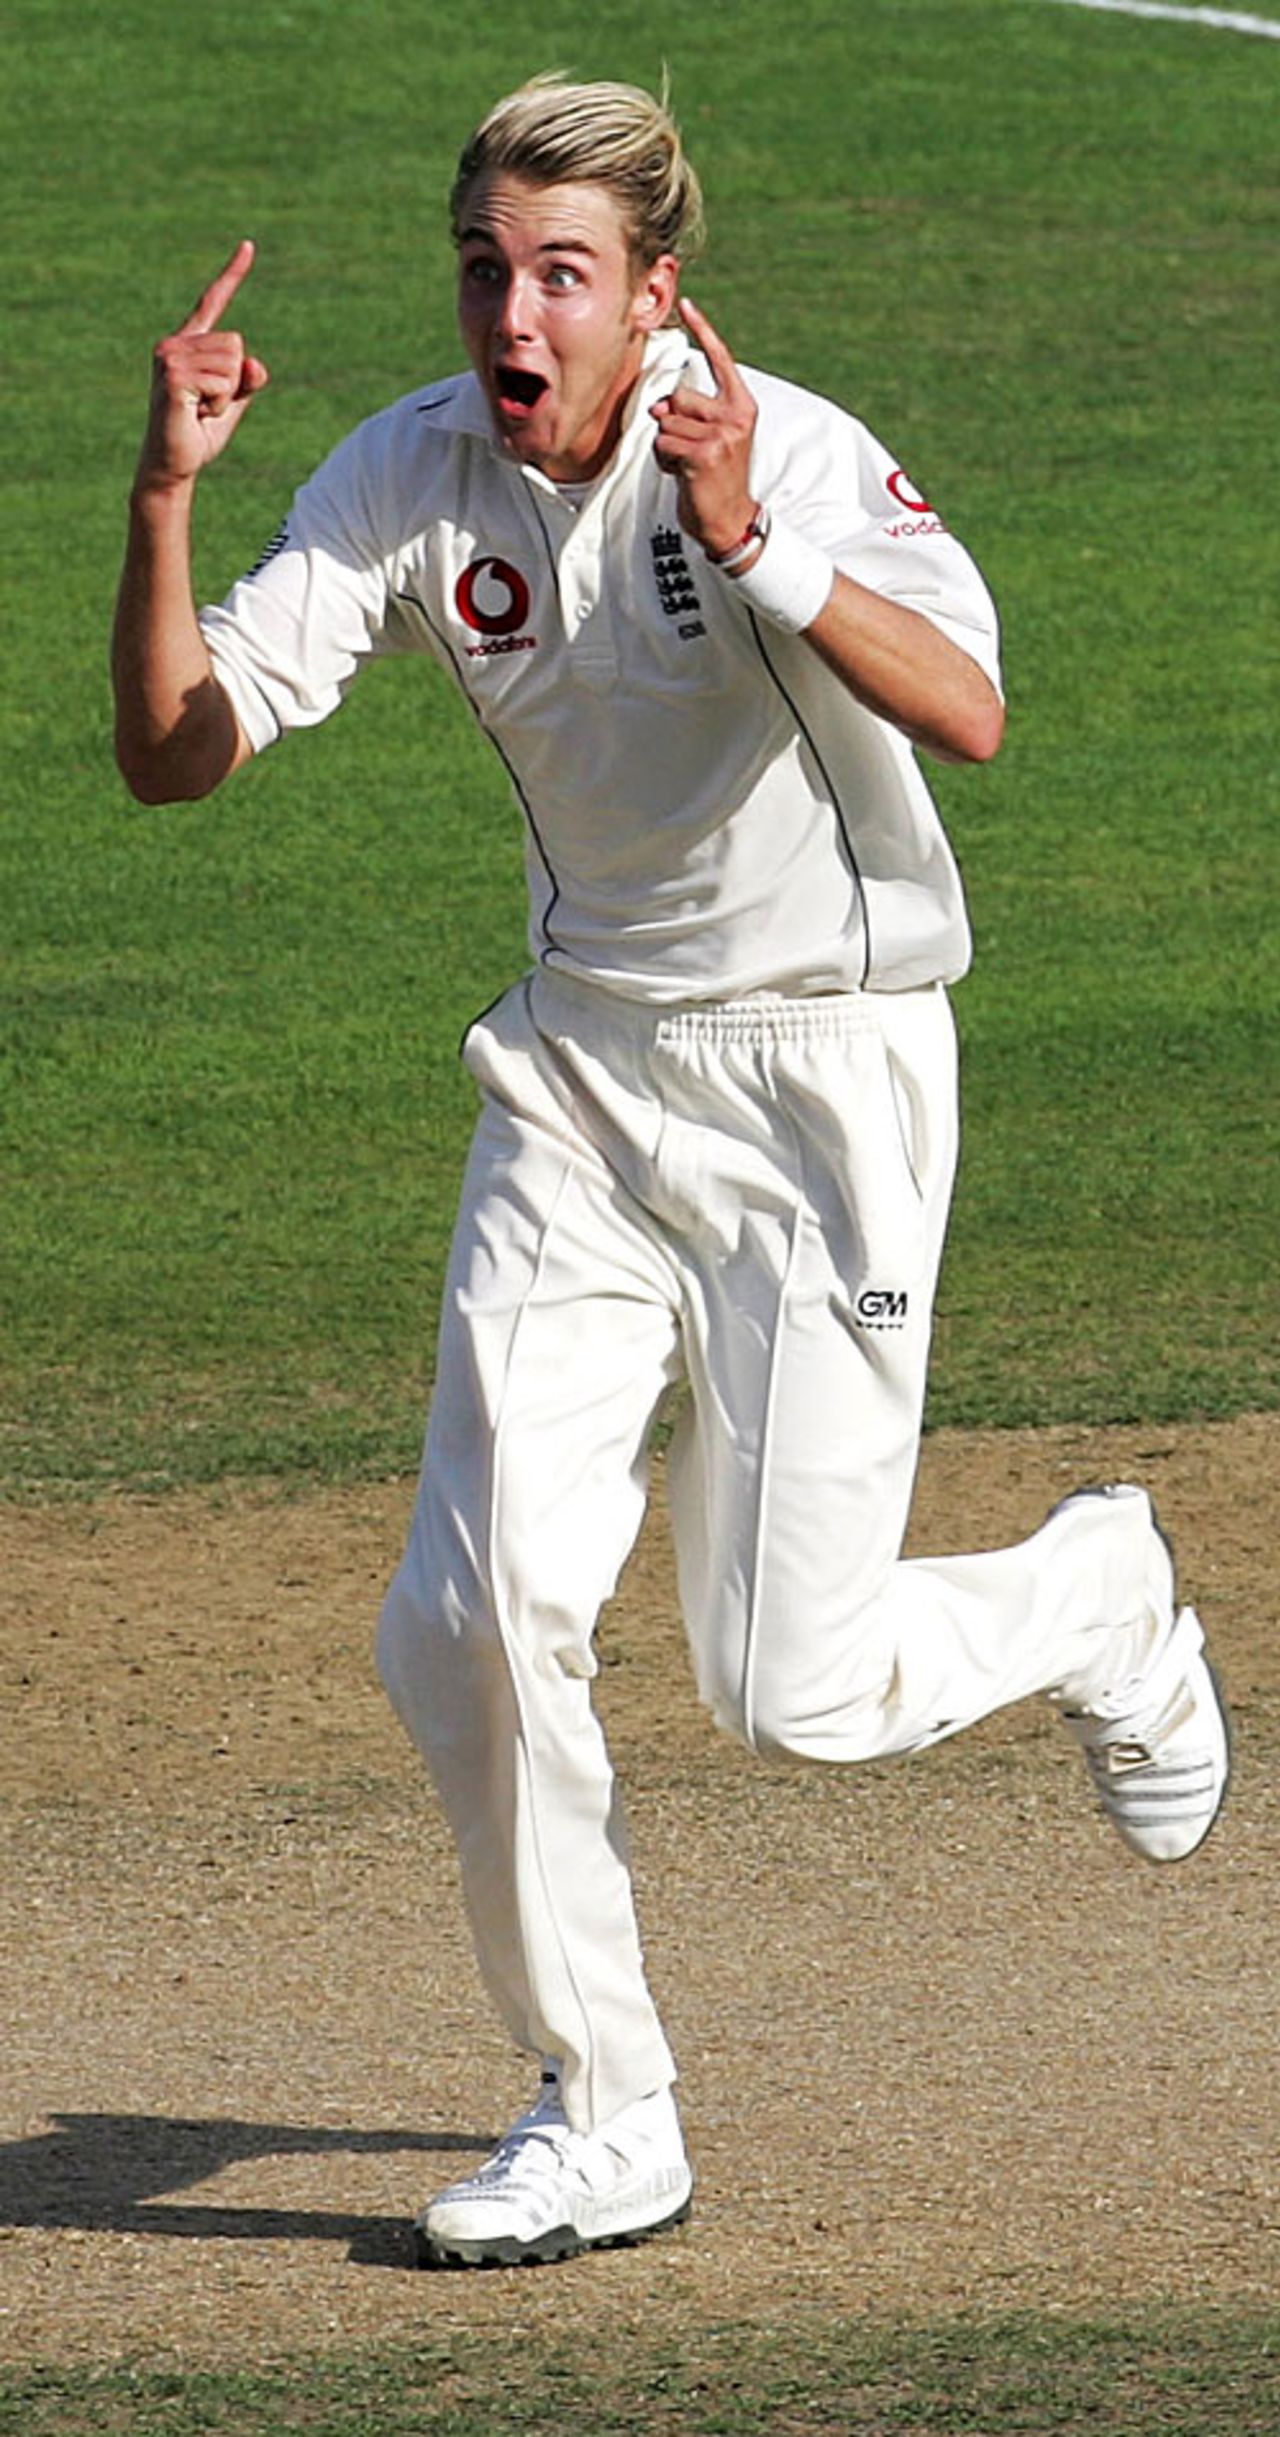 A delighted Stuart Broad celebrates one of his two wickets, New Zealand v England, 3rd Test, Napier, March 25, 2008